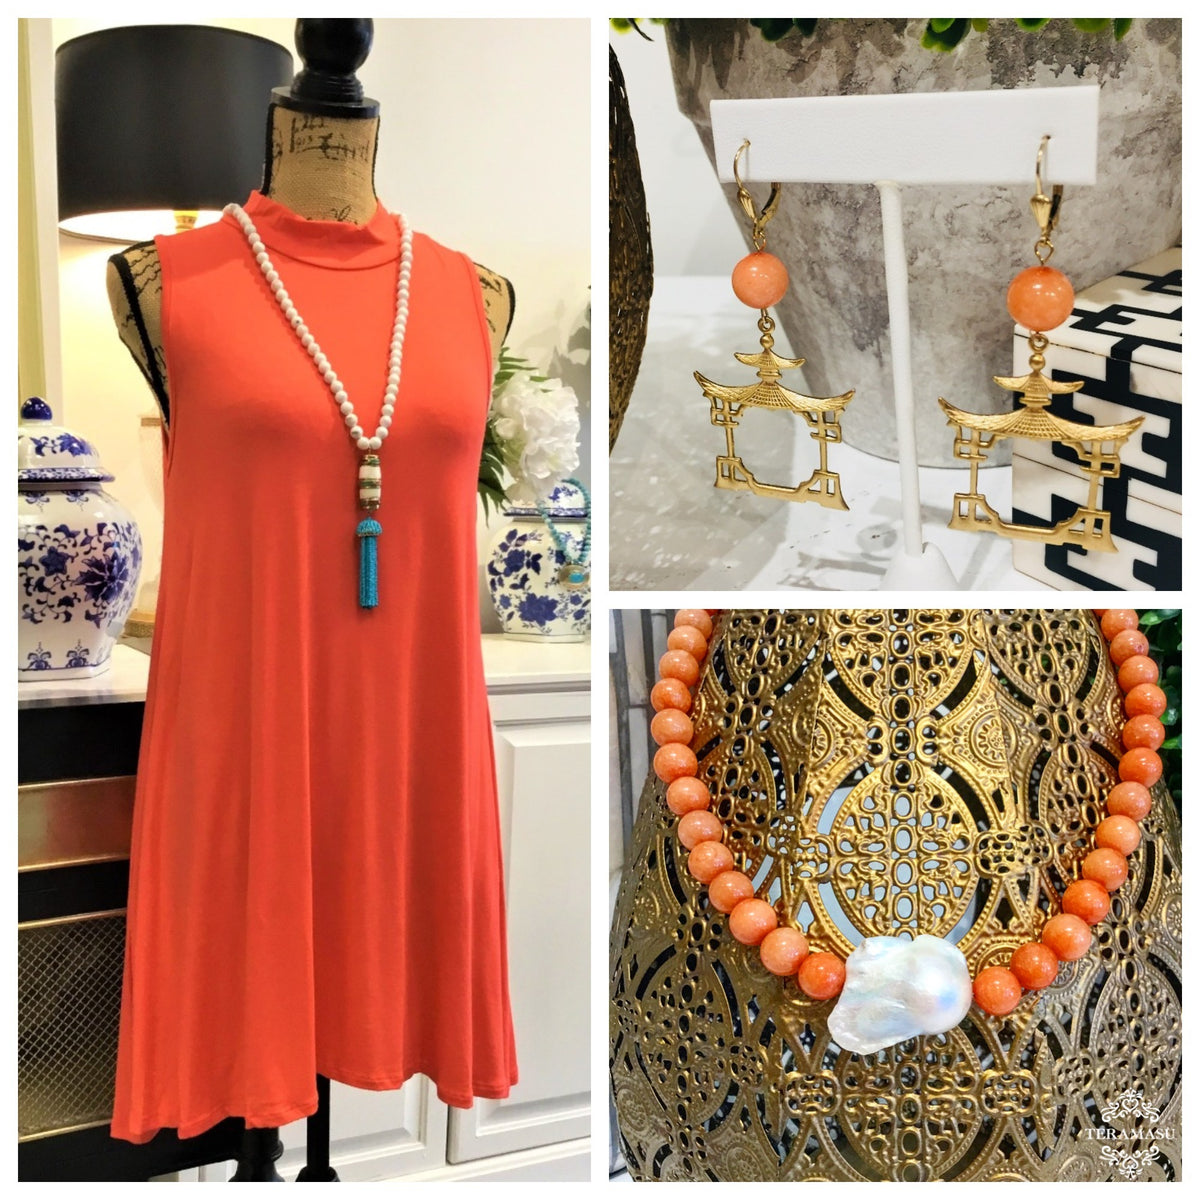 "Want It" Wednesday: Stylish & New Coral-Inspired Outfit Inspiration from Teramasu